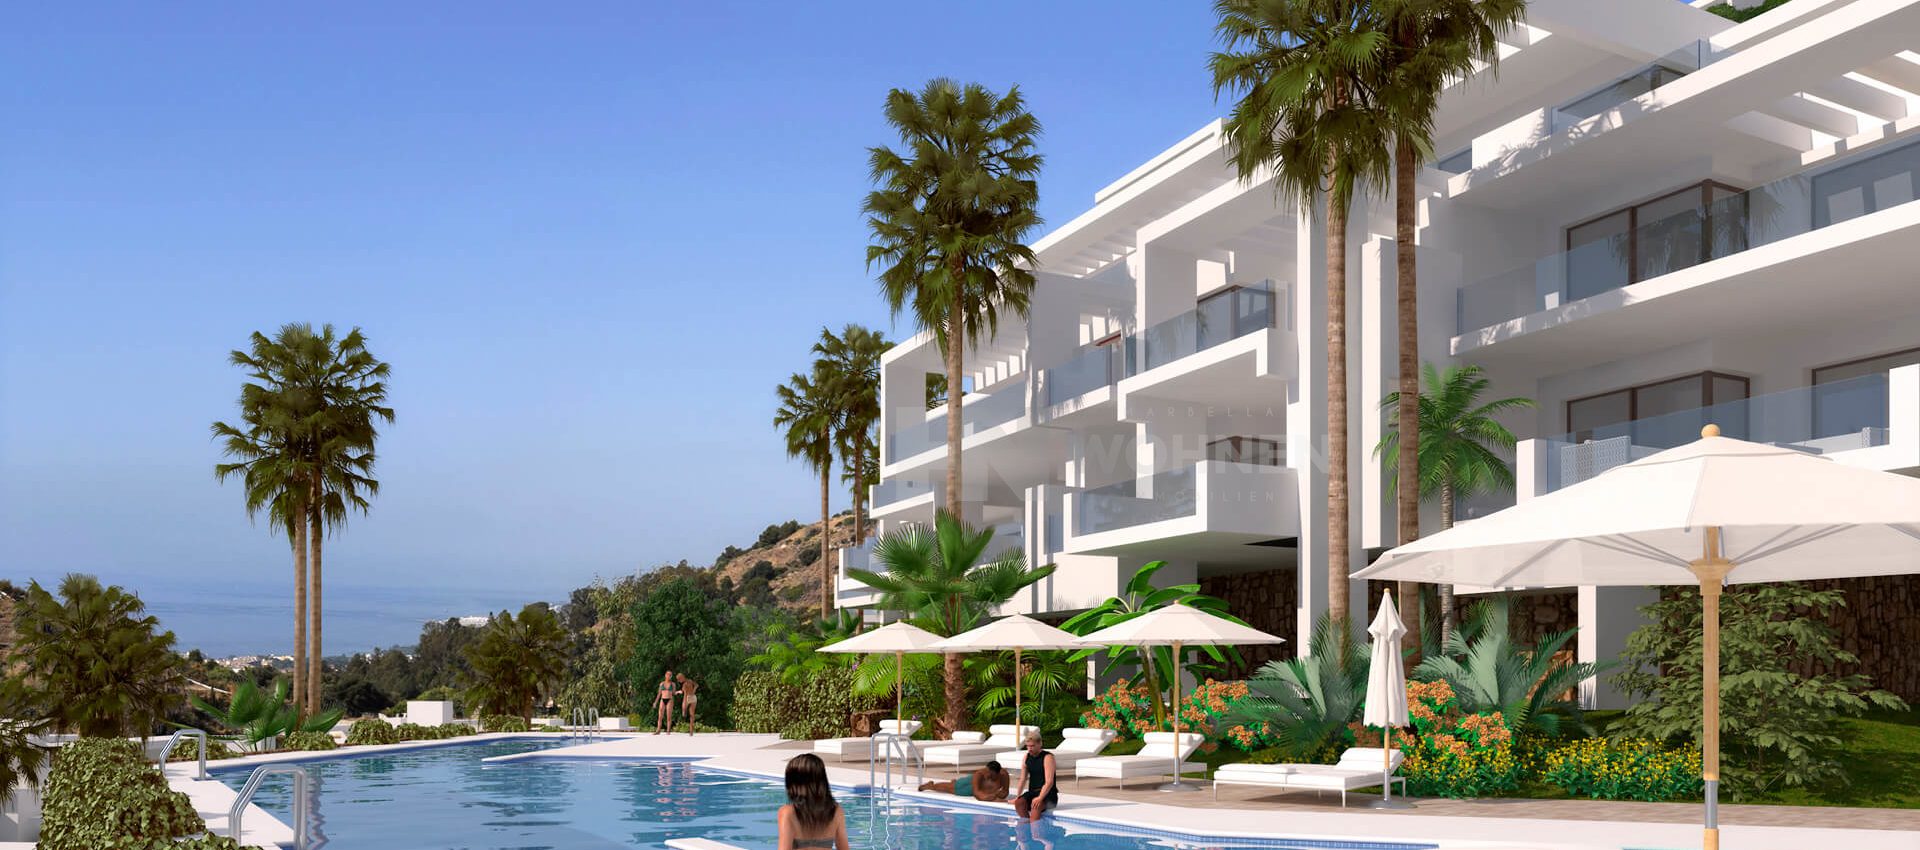 Impressive contemporary apartments with magnificent panoramic views of the Mediterranean Sea